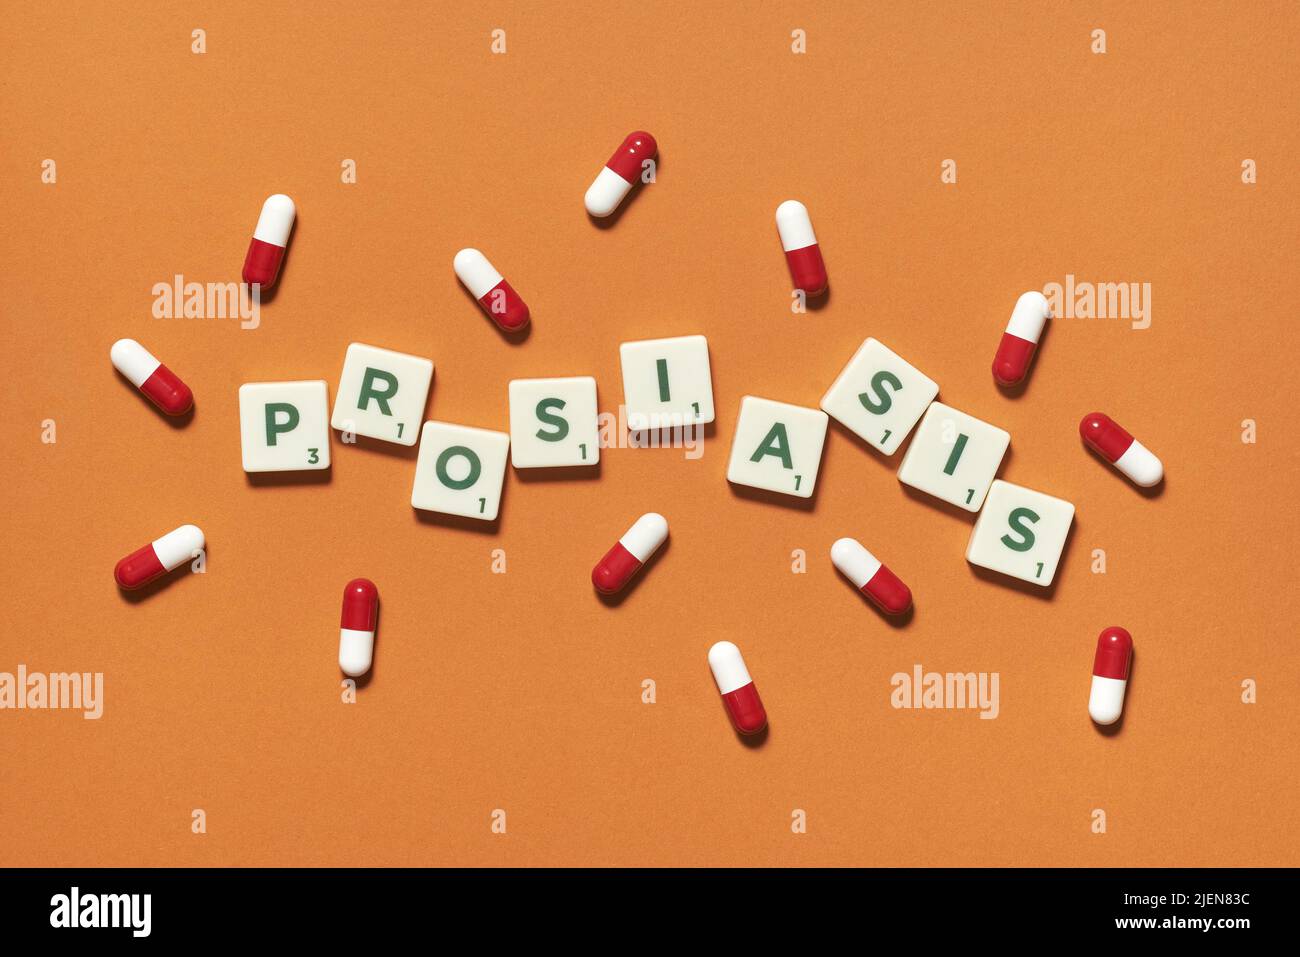 Psoriasis formed of scrabble blocks and pharmaceutical pills. Stock Photo